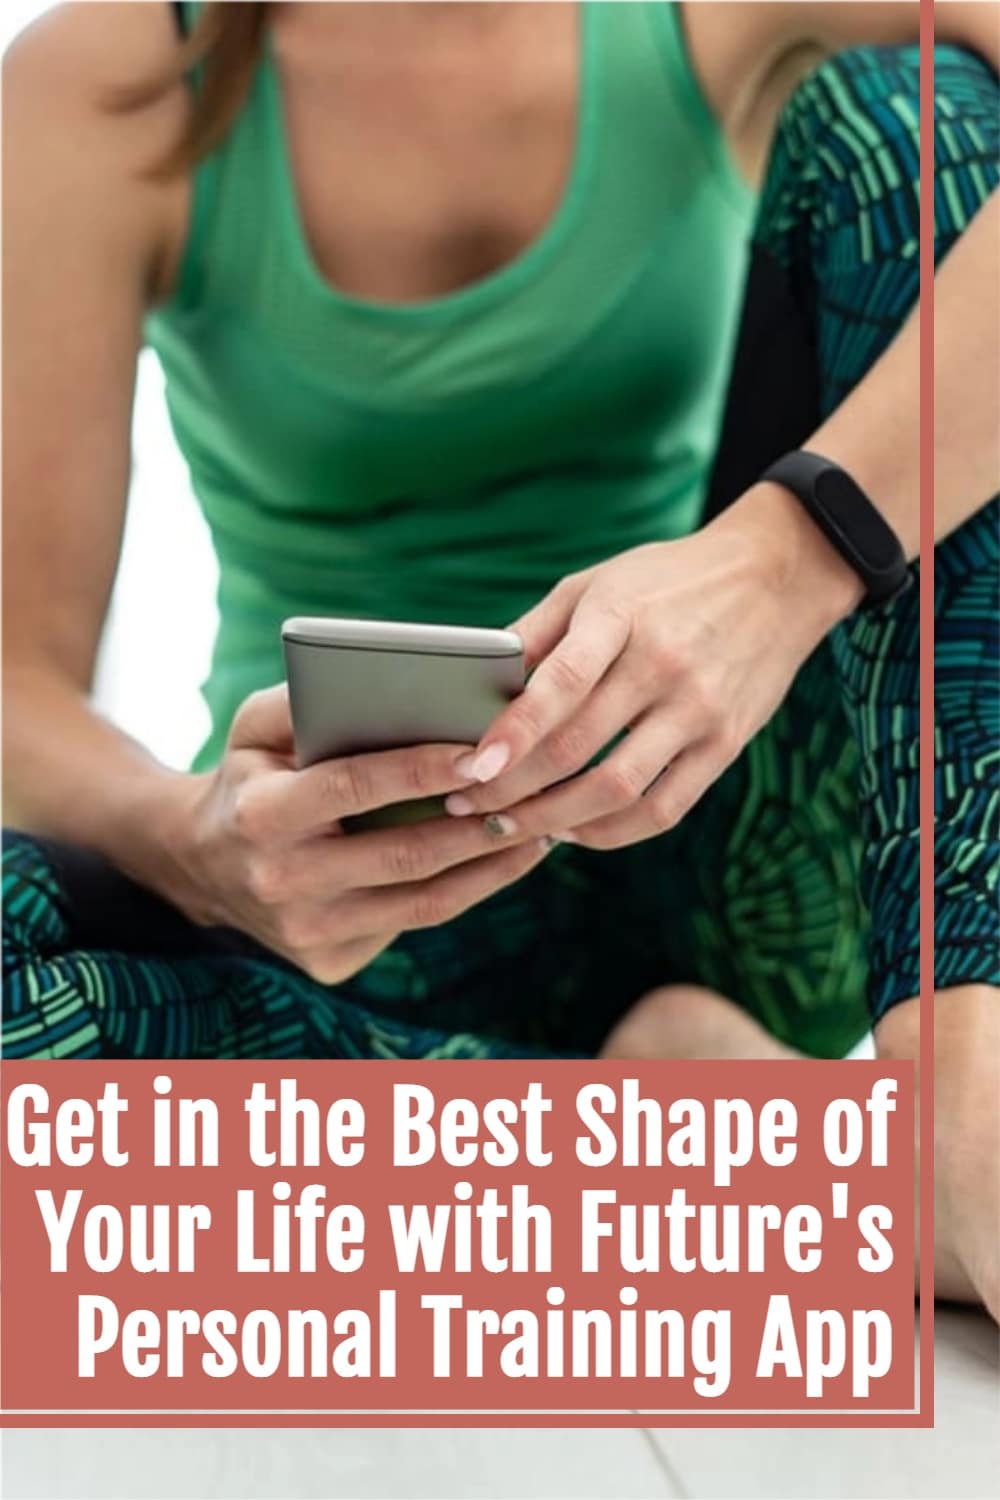 Get-in-the-Best-Shape-of-Your-Life-with-Future's-Personal-Training-App